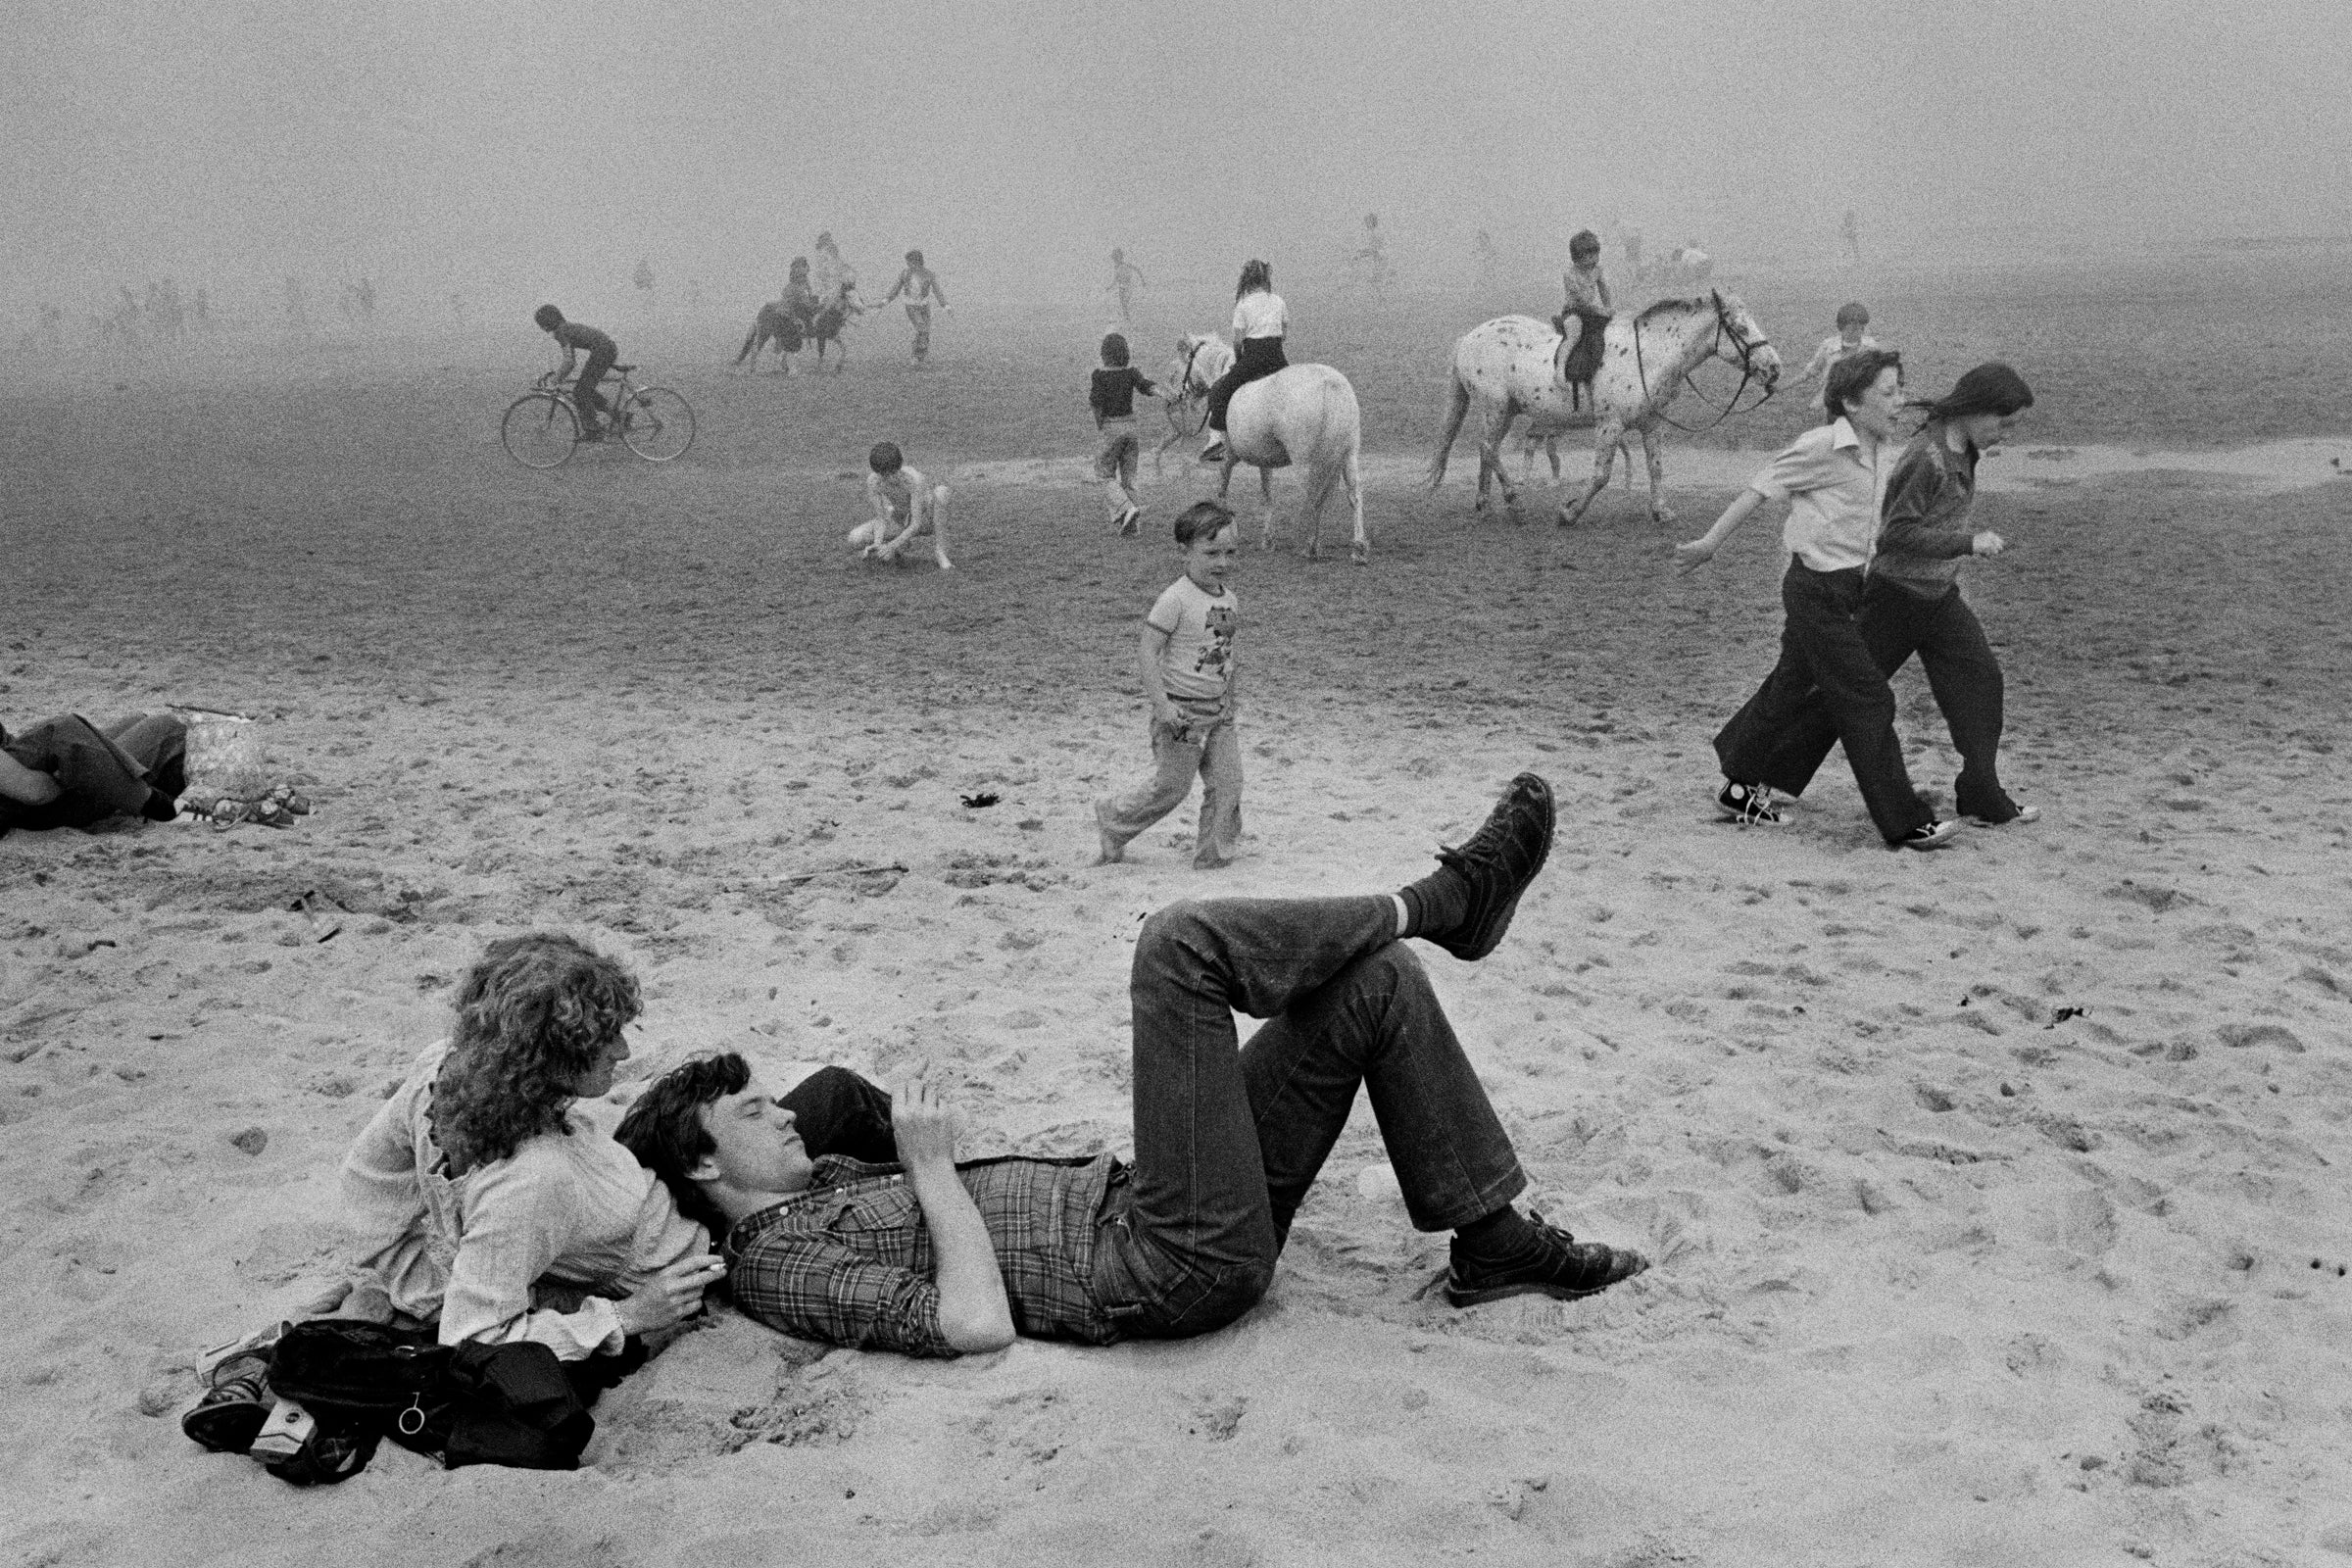 By The Sea: Photographs from the North East 1976-1980